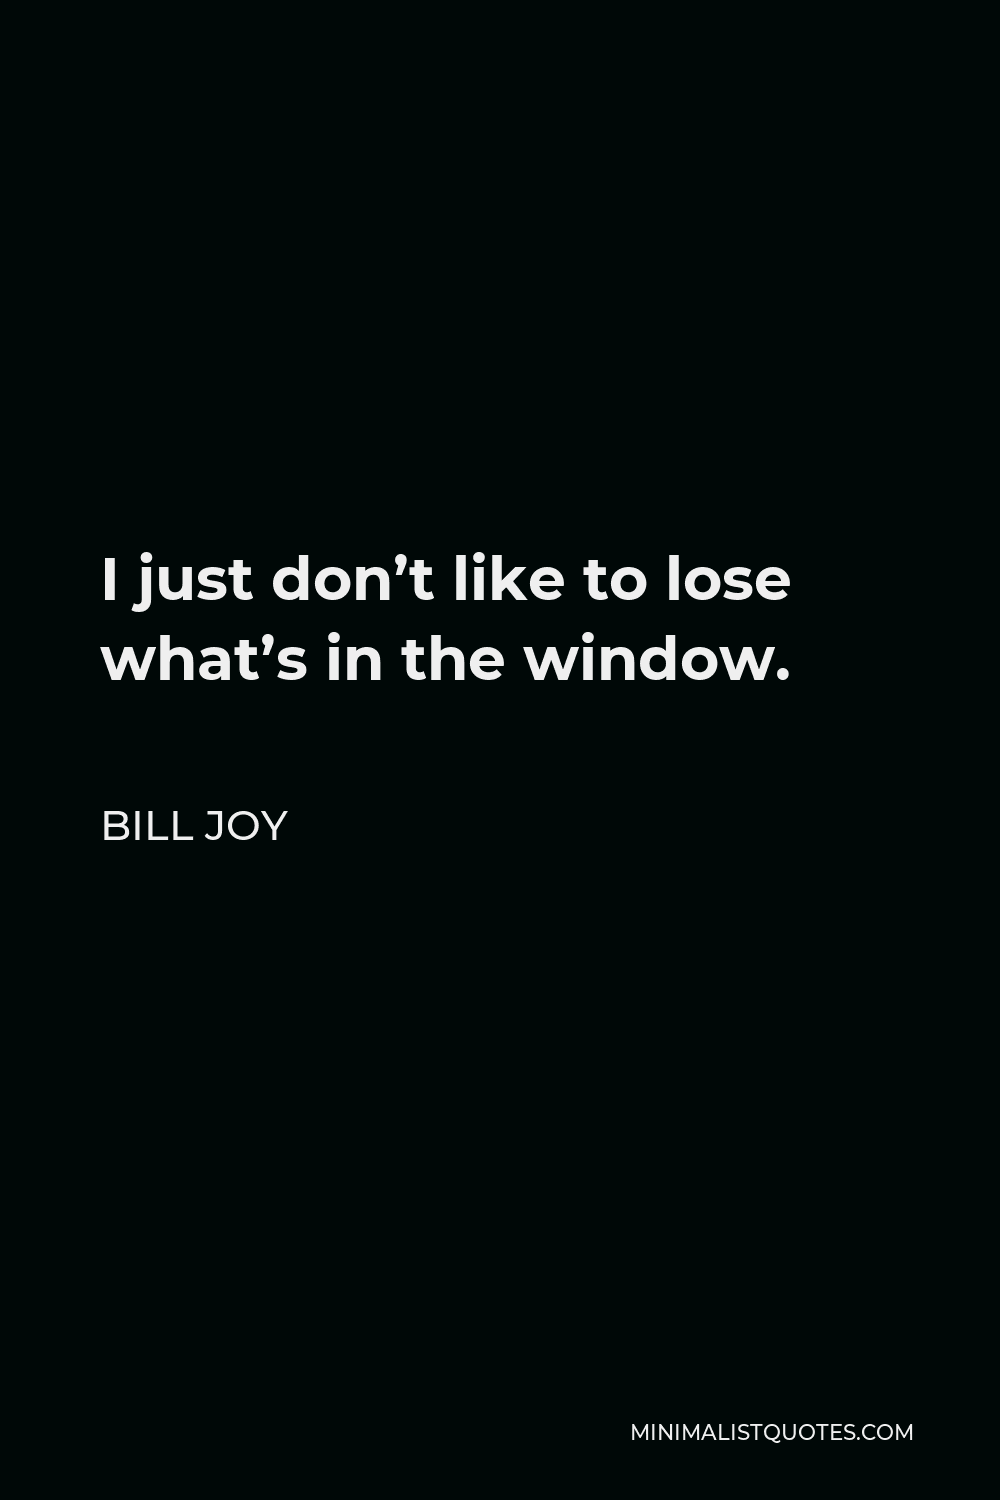 Bill Joy Quote - I just don’t like to lose what’s in the window.